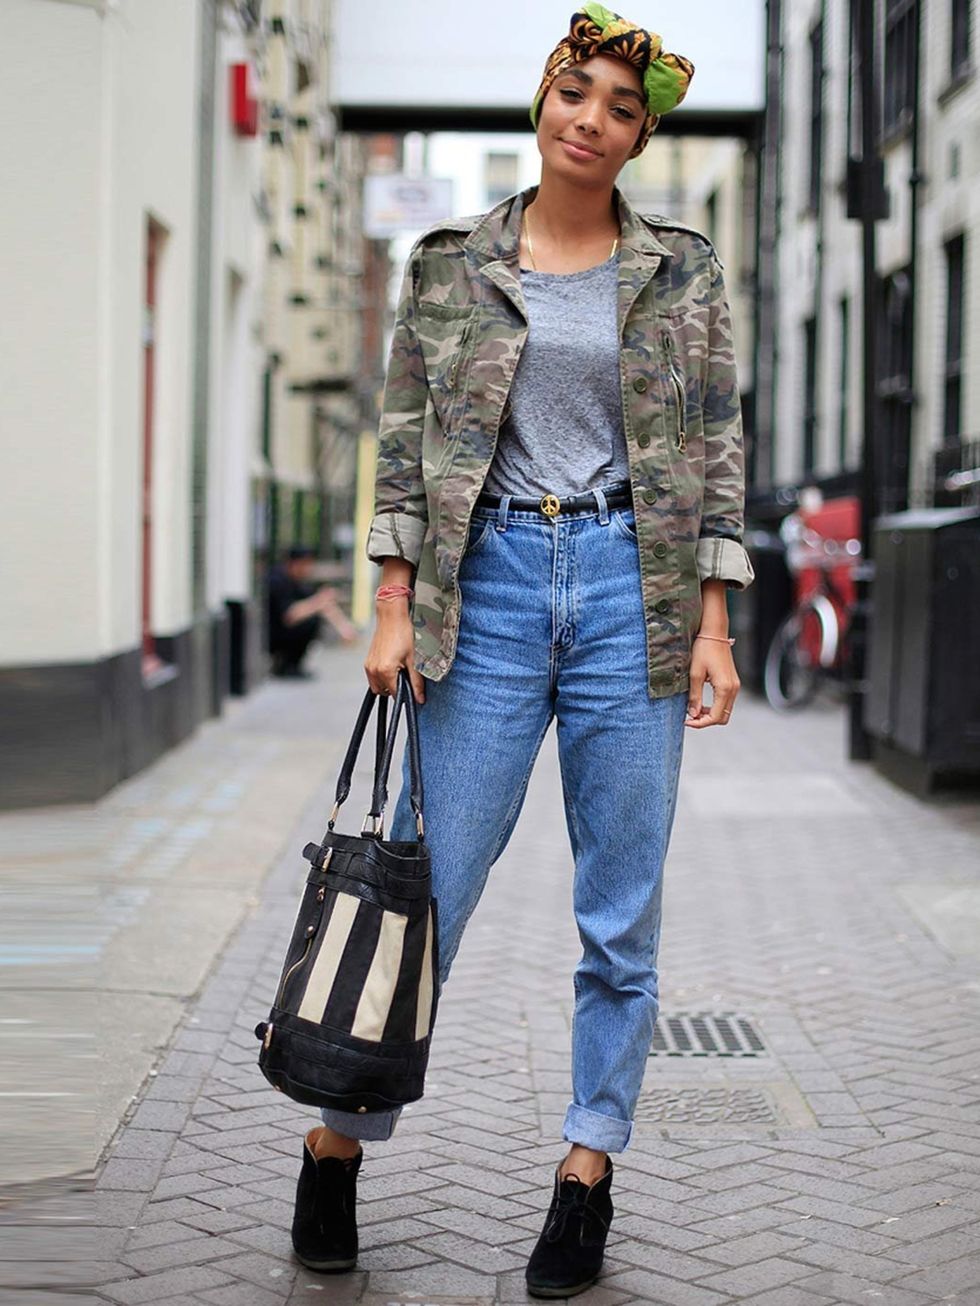 <p>Joanna, 26, TV Researcher. Topshop jacket and t-shirt, American Apparel jeans, Clarks shoes, vintage headscarf, Deena &amp; Ozzy bag.</p>